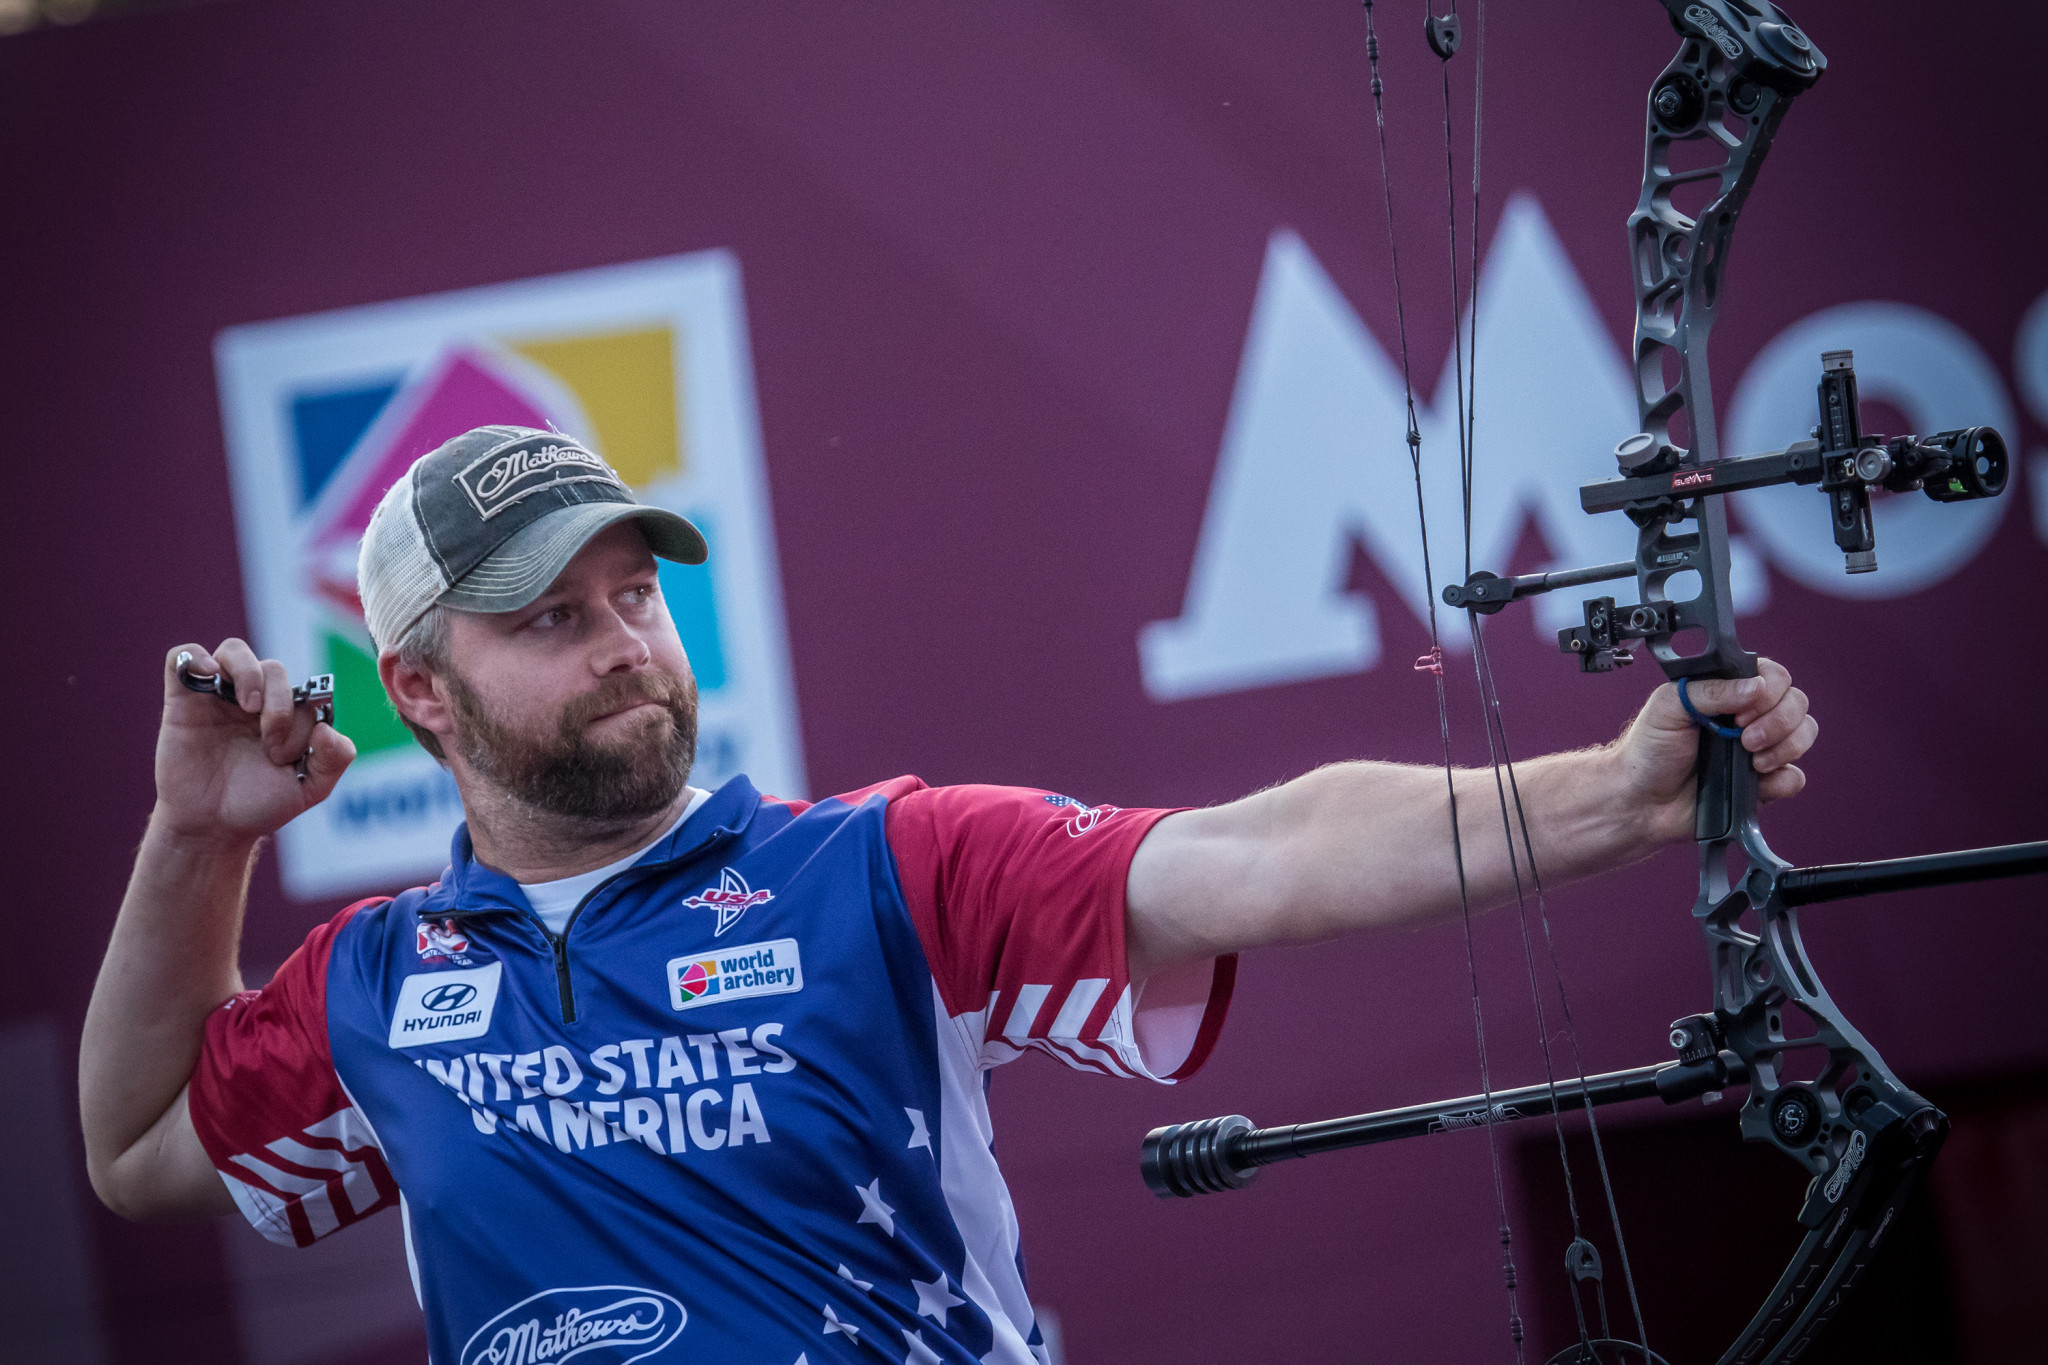 United States, Colombia and Germany win team bronze medals at Archery World Cup